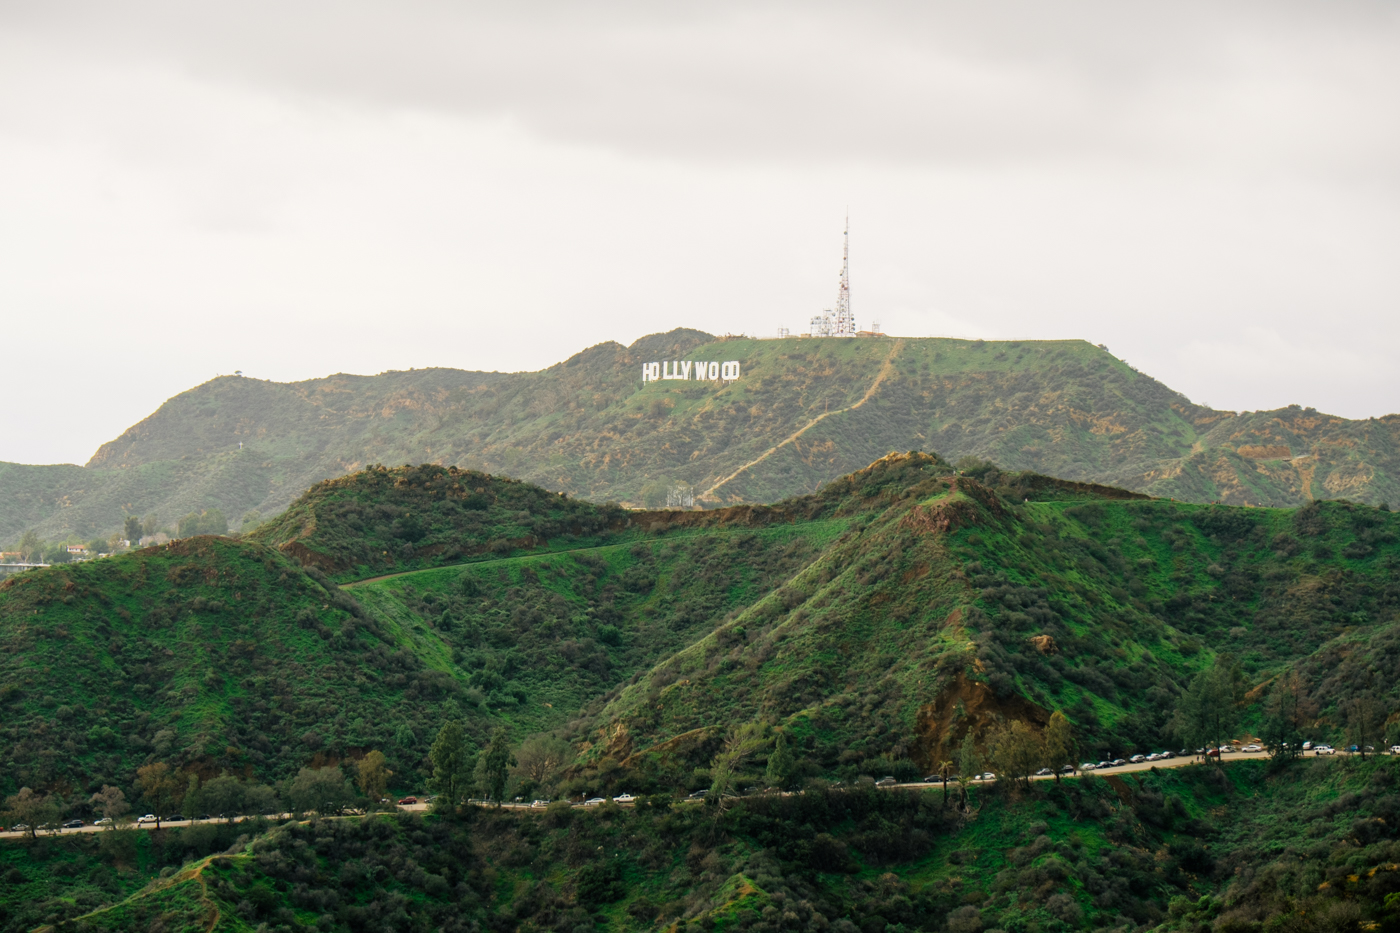 Debora Dahl, Lala land Location guide, Los Angeles, GRIFFITH OBSERVATORY, Hollywood sign